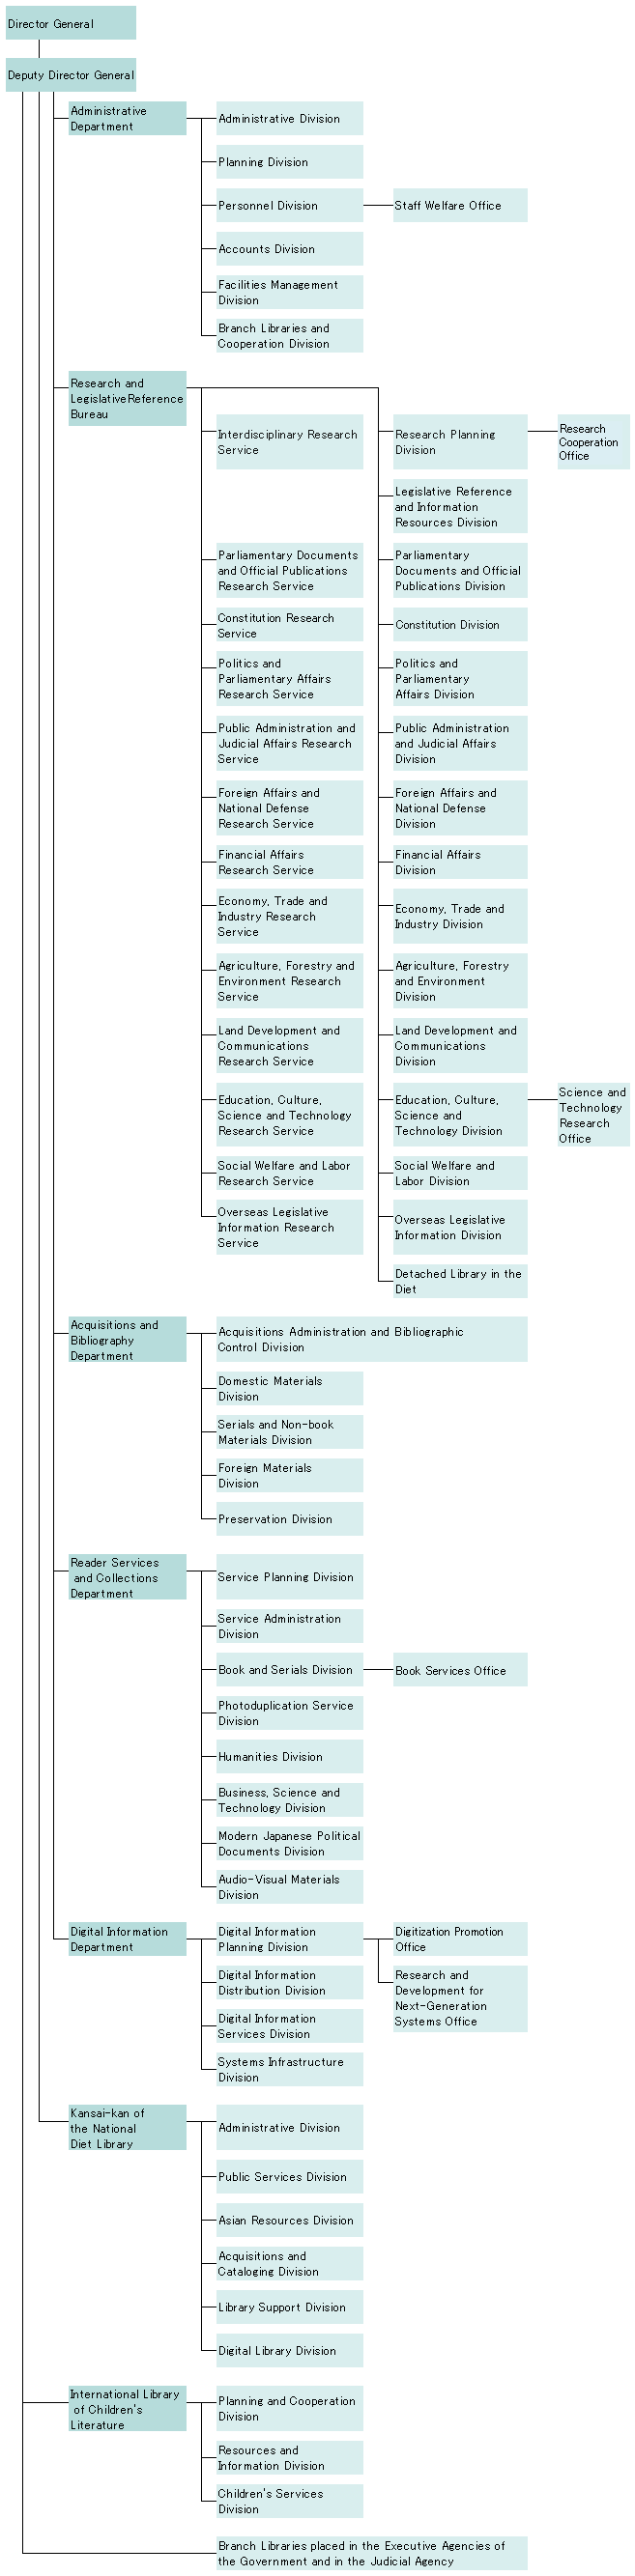 Organization Chart of the National Diet Library